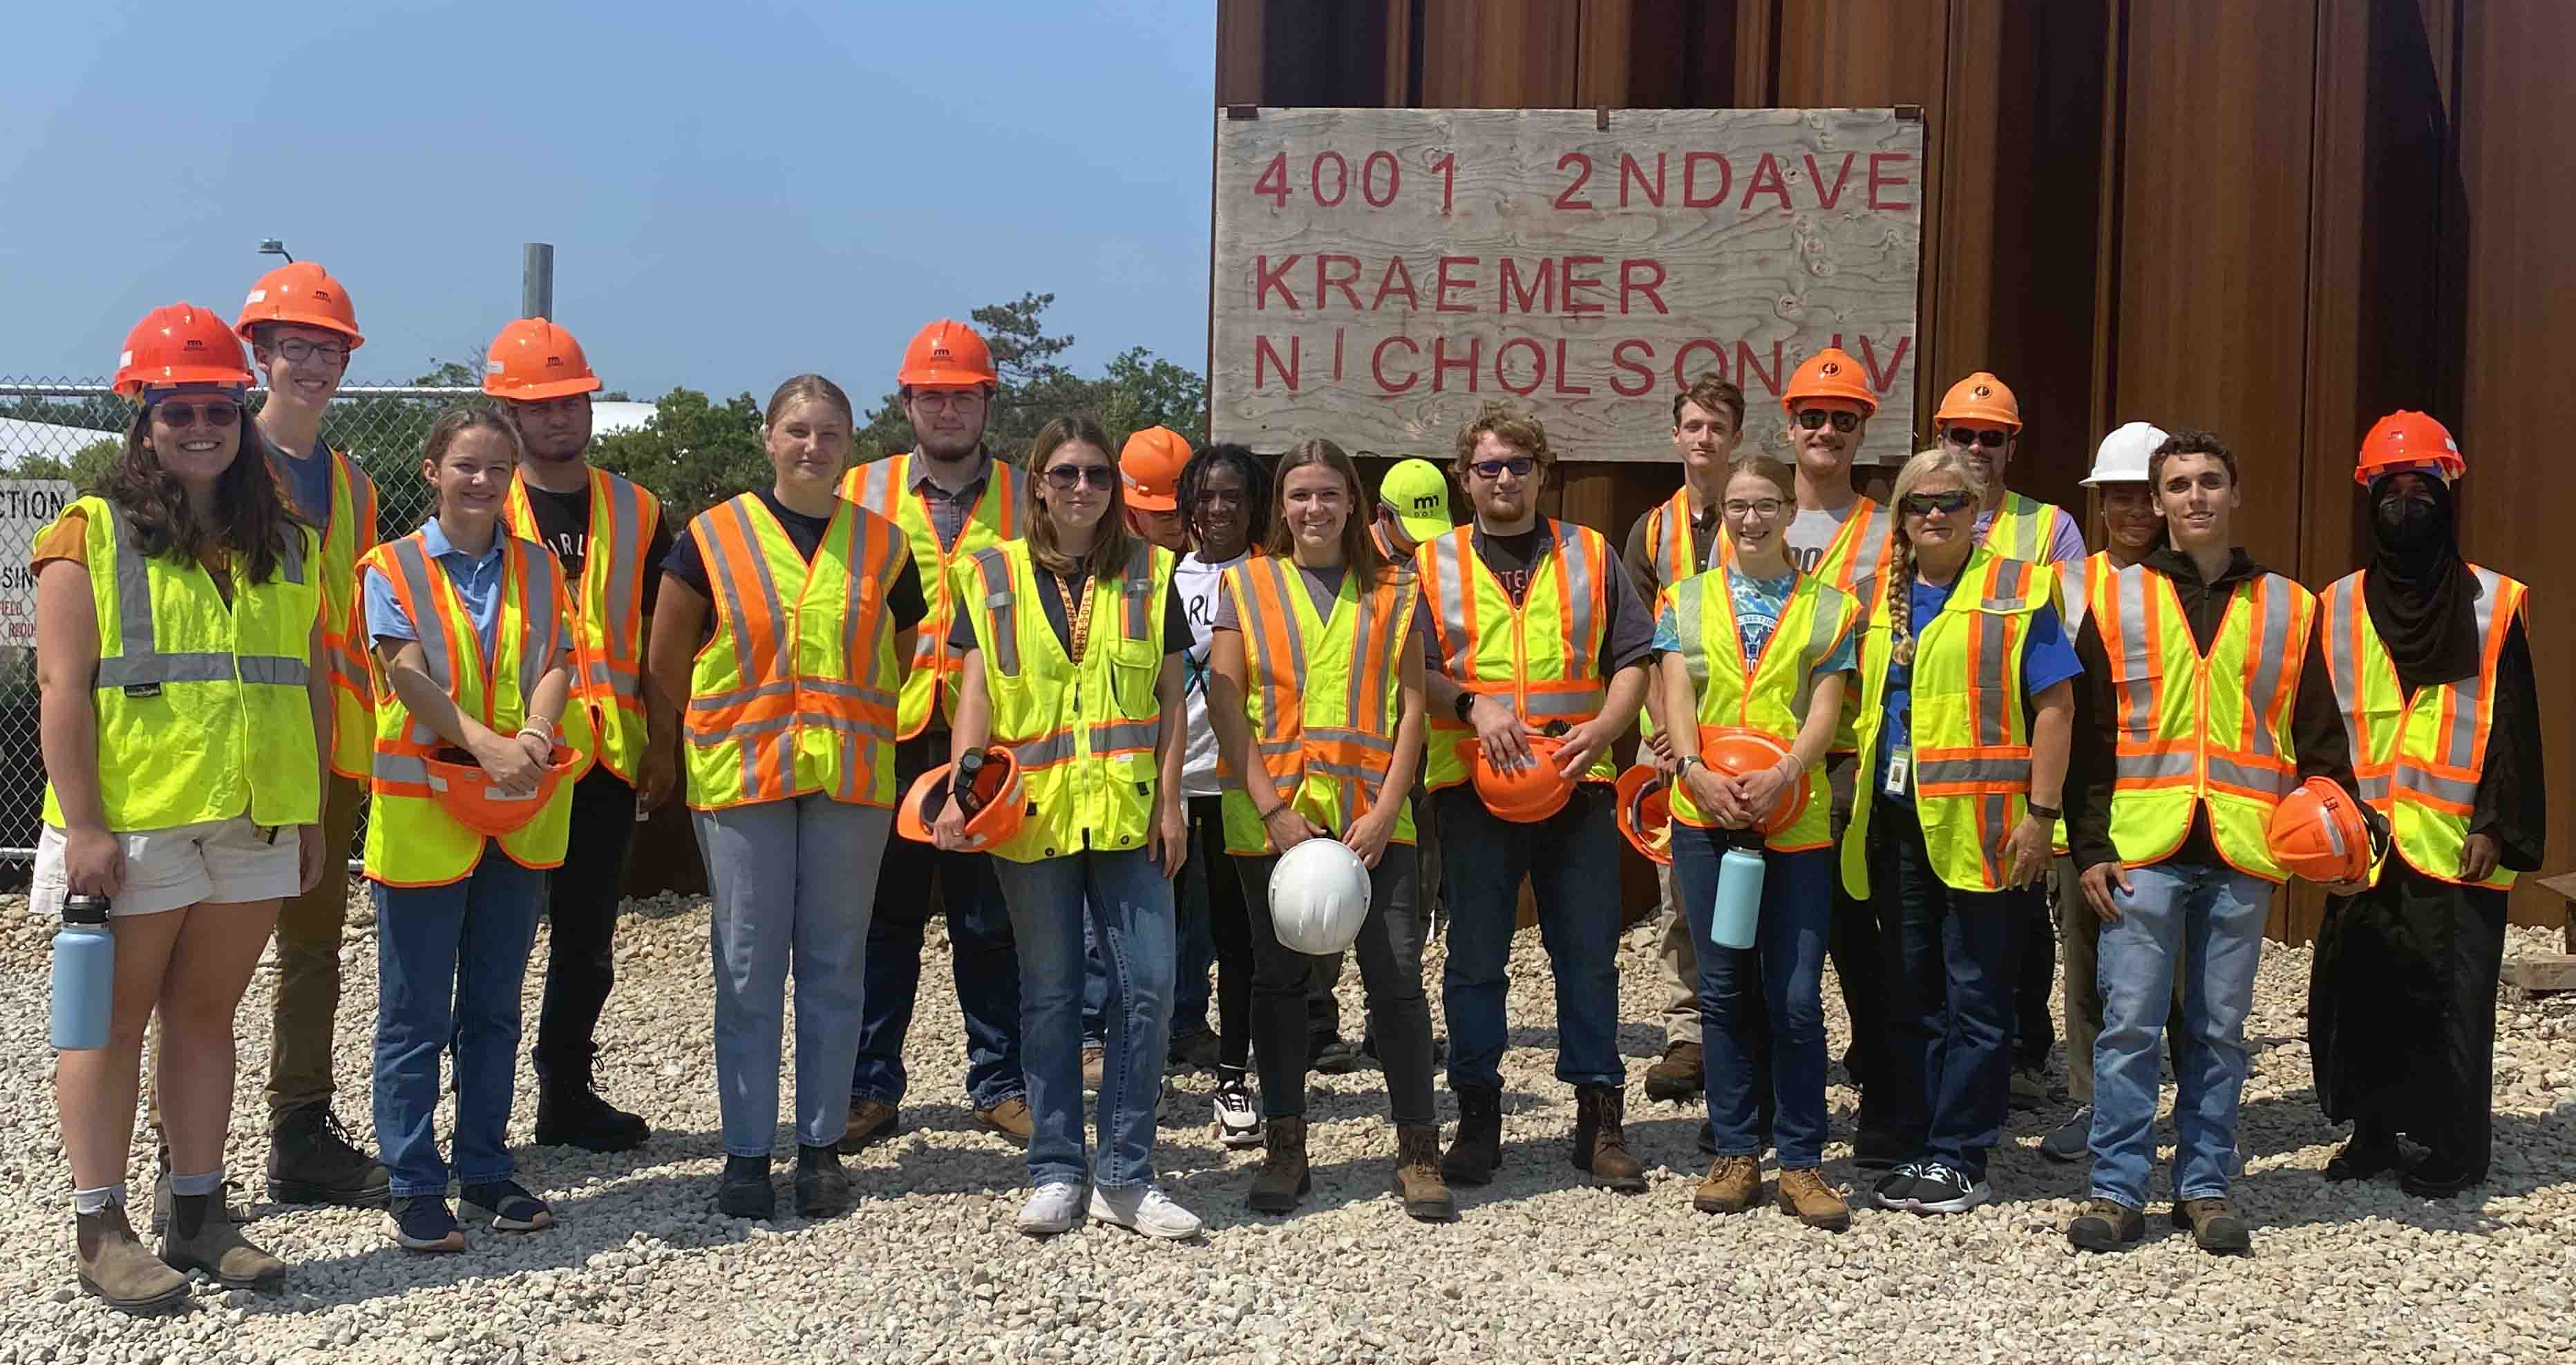 Students from the Civil Engineering and Phoenix Programs standing outside next to the address for the stomwater storage facility in south Minneapolis